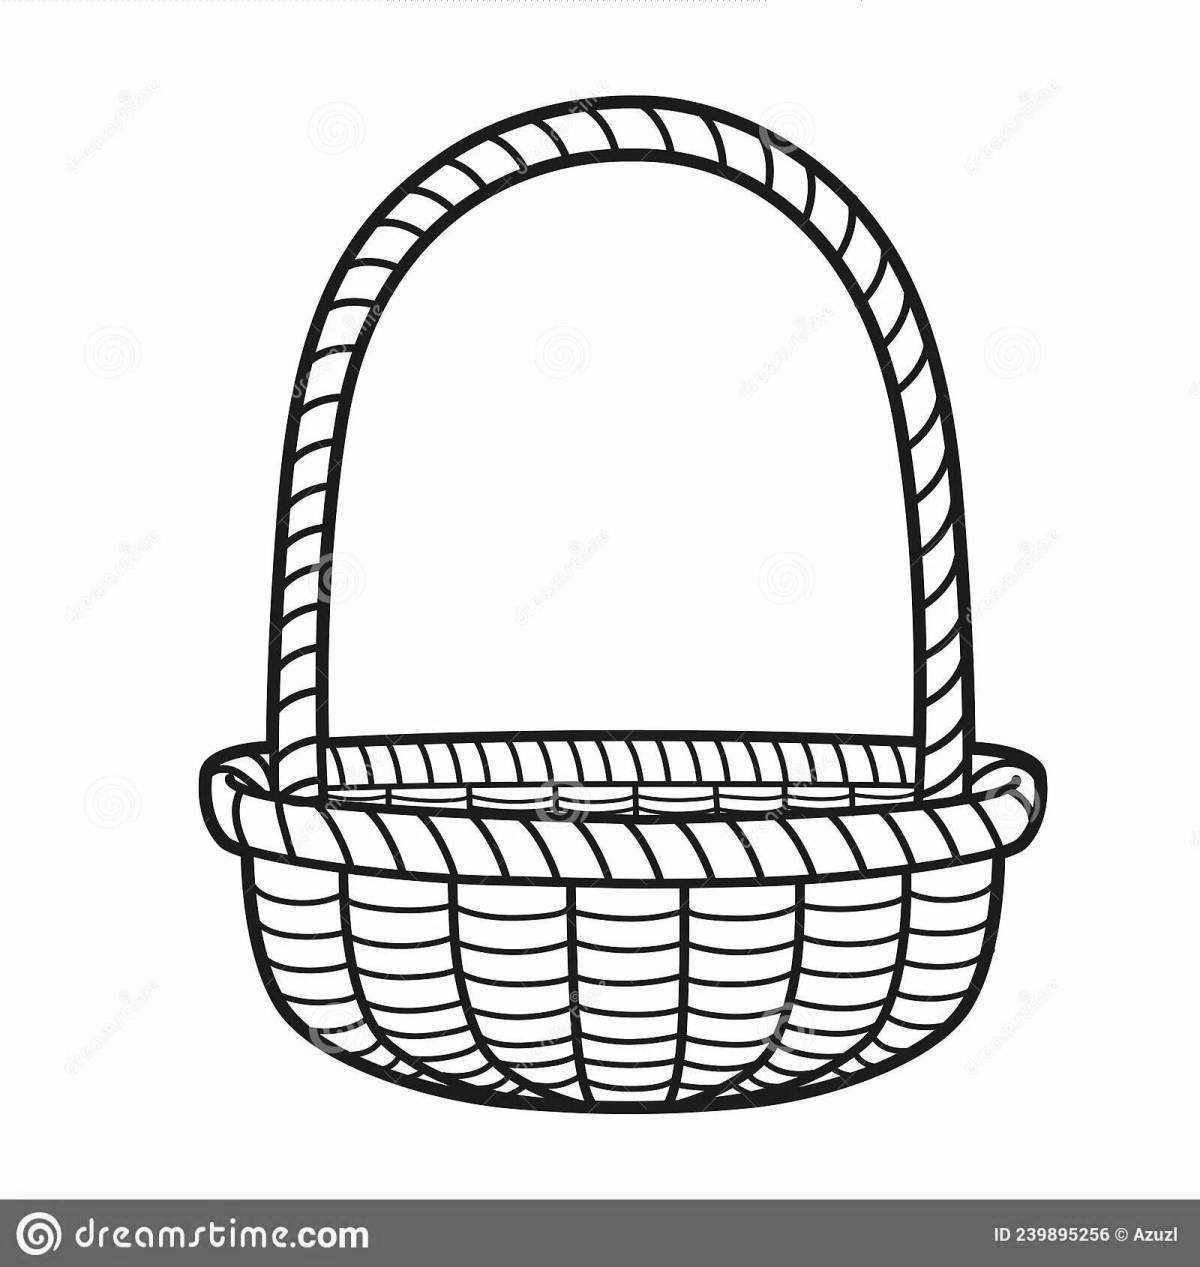 Shiny empty basket coloring book for kids